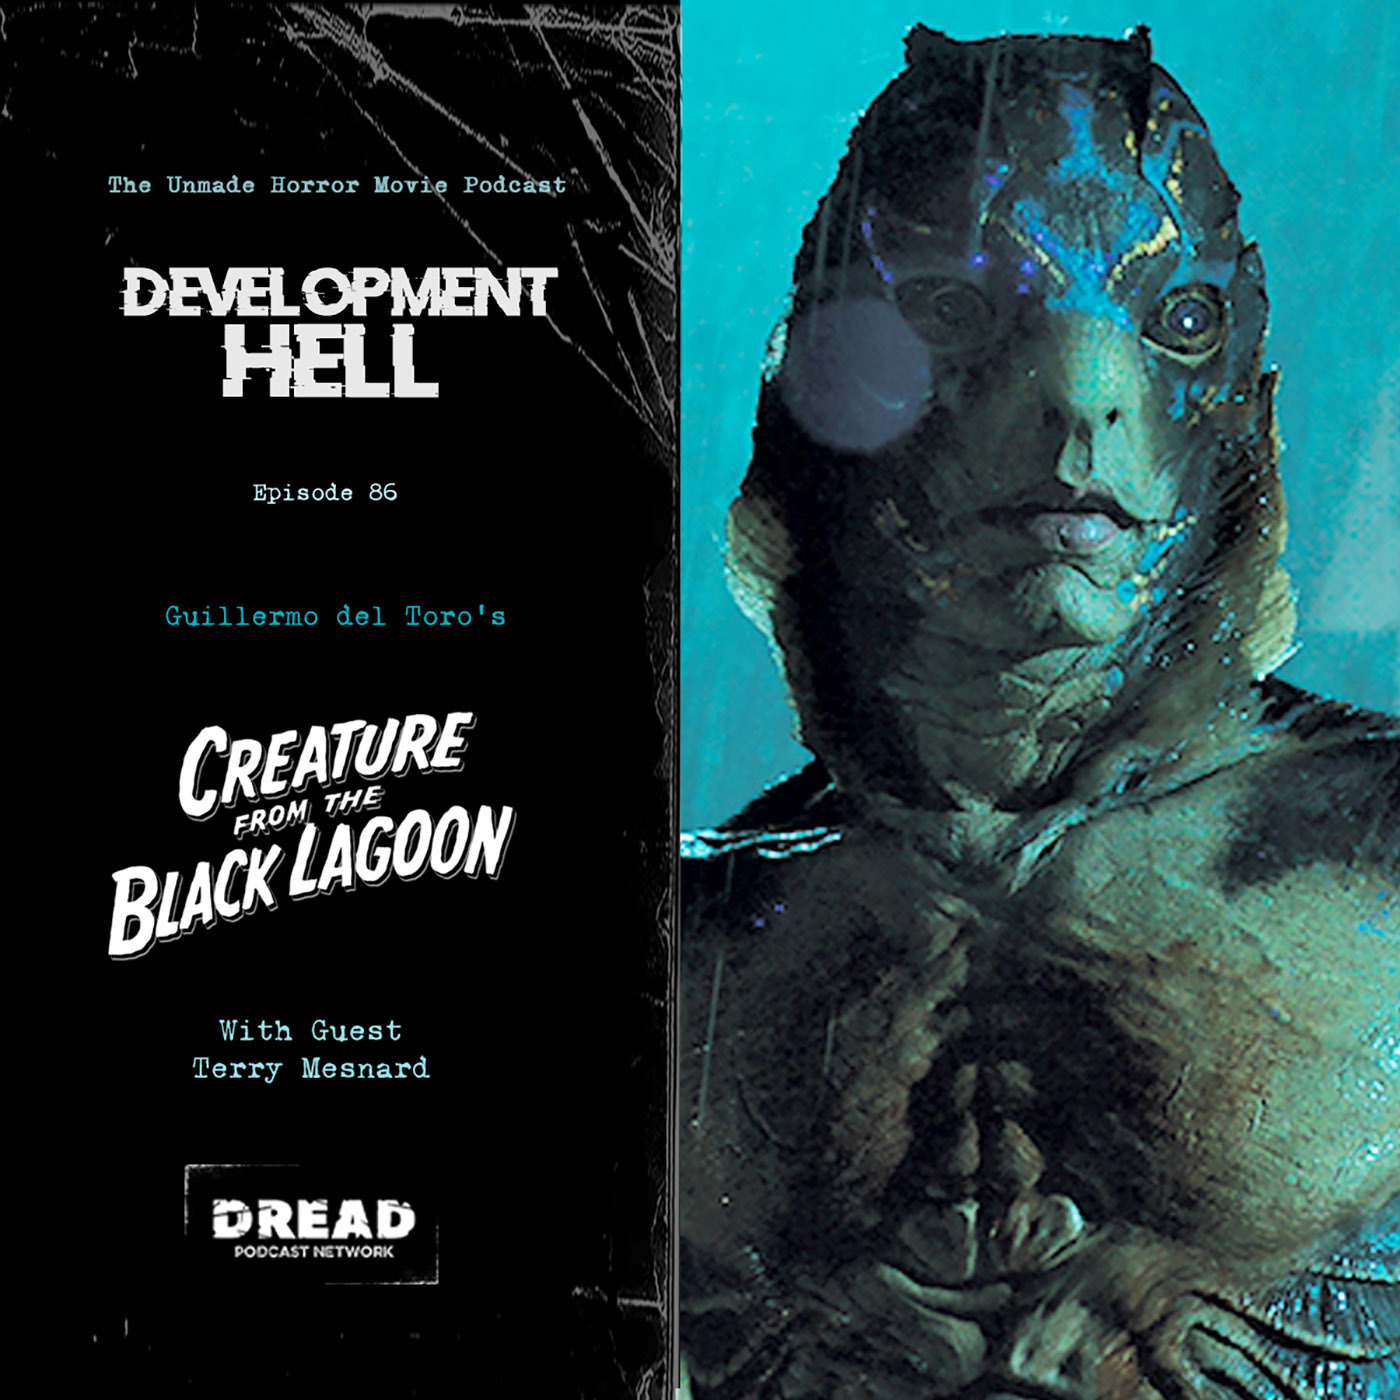 Guillermo del Toro's CREATURE FROM THE BLACK LAGOON (with Terry Mesnard)